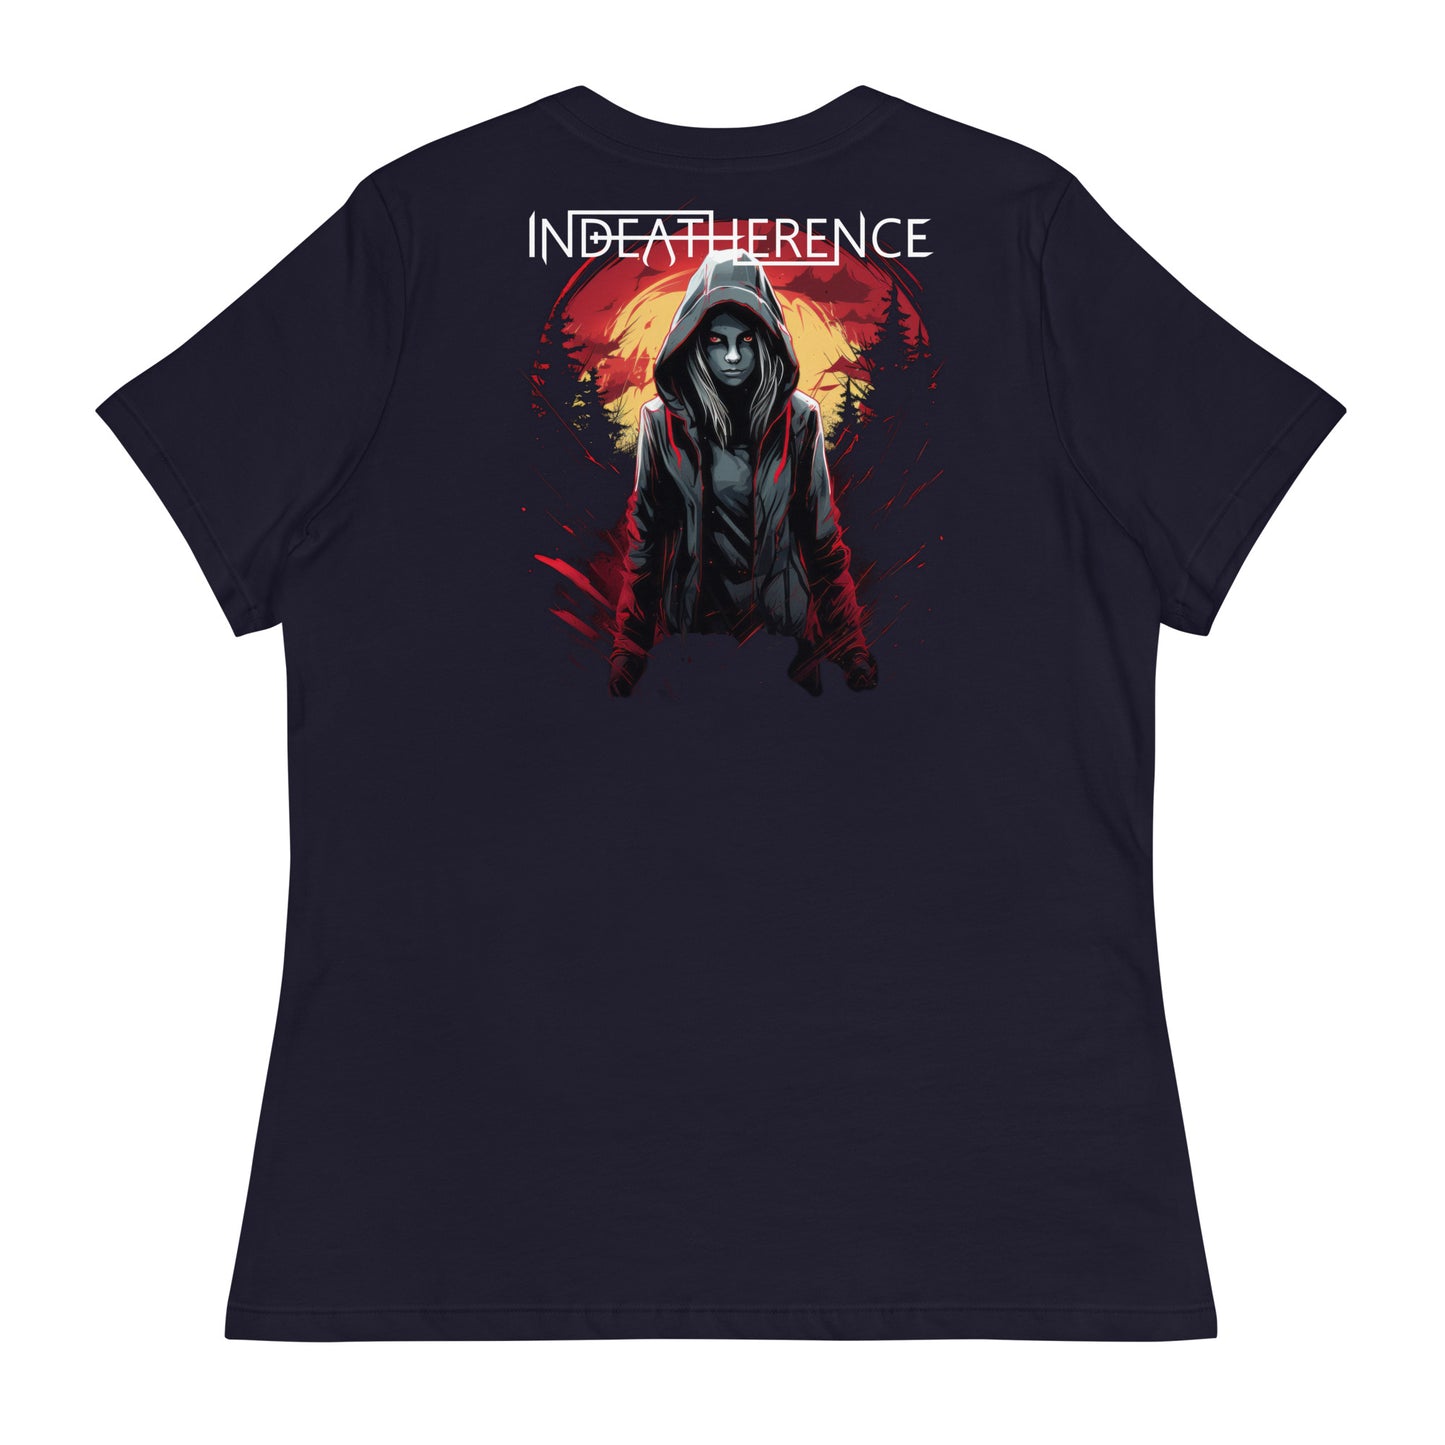 "And From The Shadows They Shall Rise" GIRLY SHIRT - RED